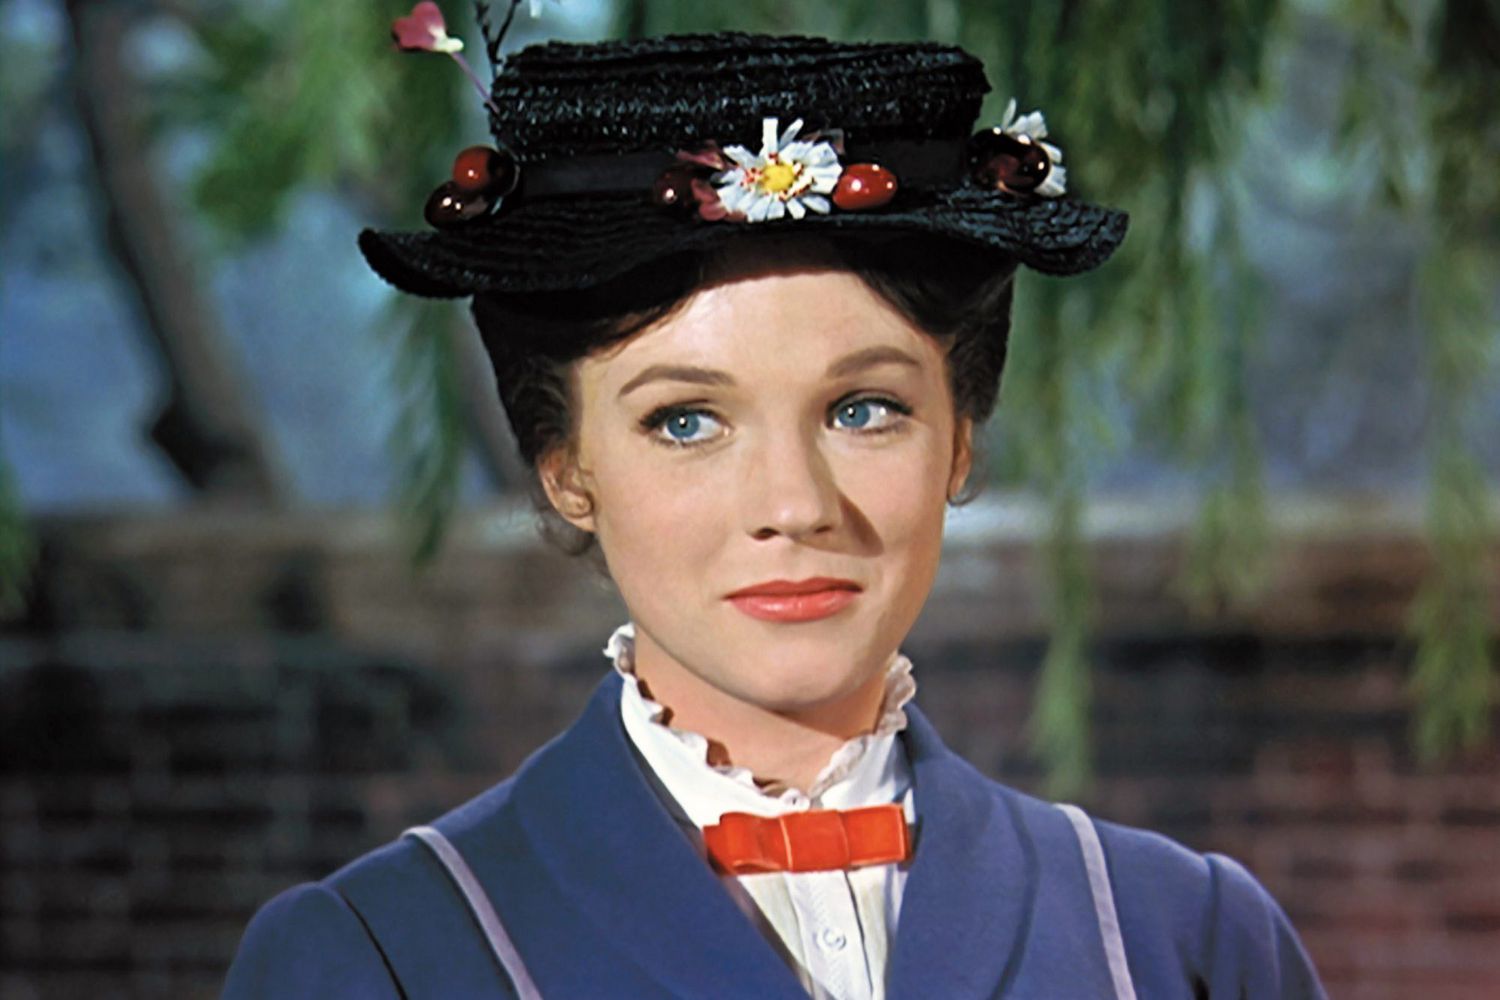 MARY POPPINS, Julie Andrews, 1964